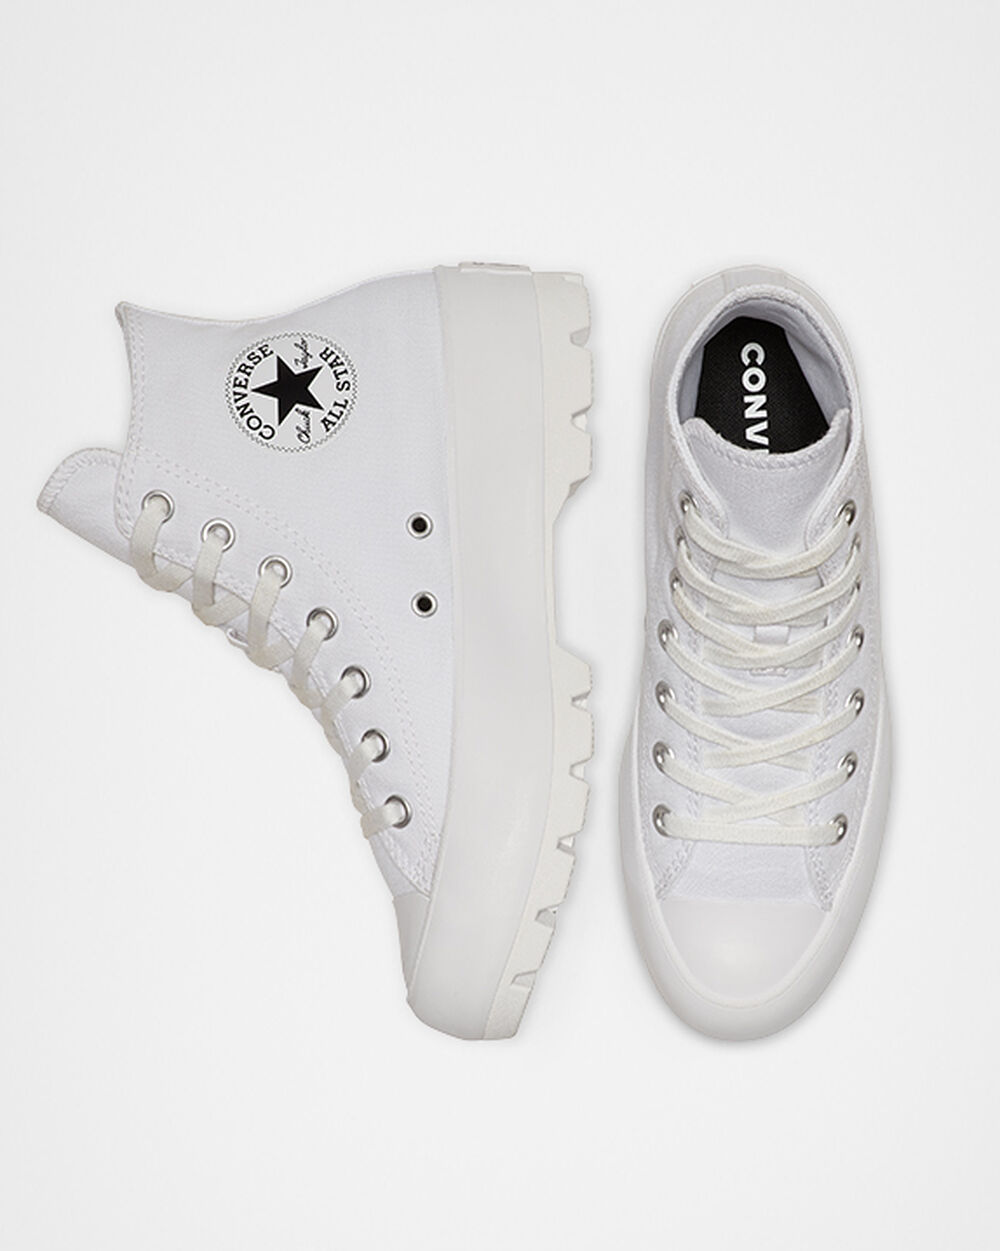 Tenis Converse Chuck Taylor All Star Lugged Mujer Blancos Negros Blancos | Mexico-463766